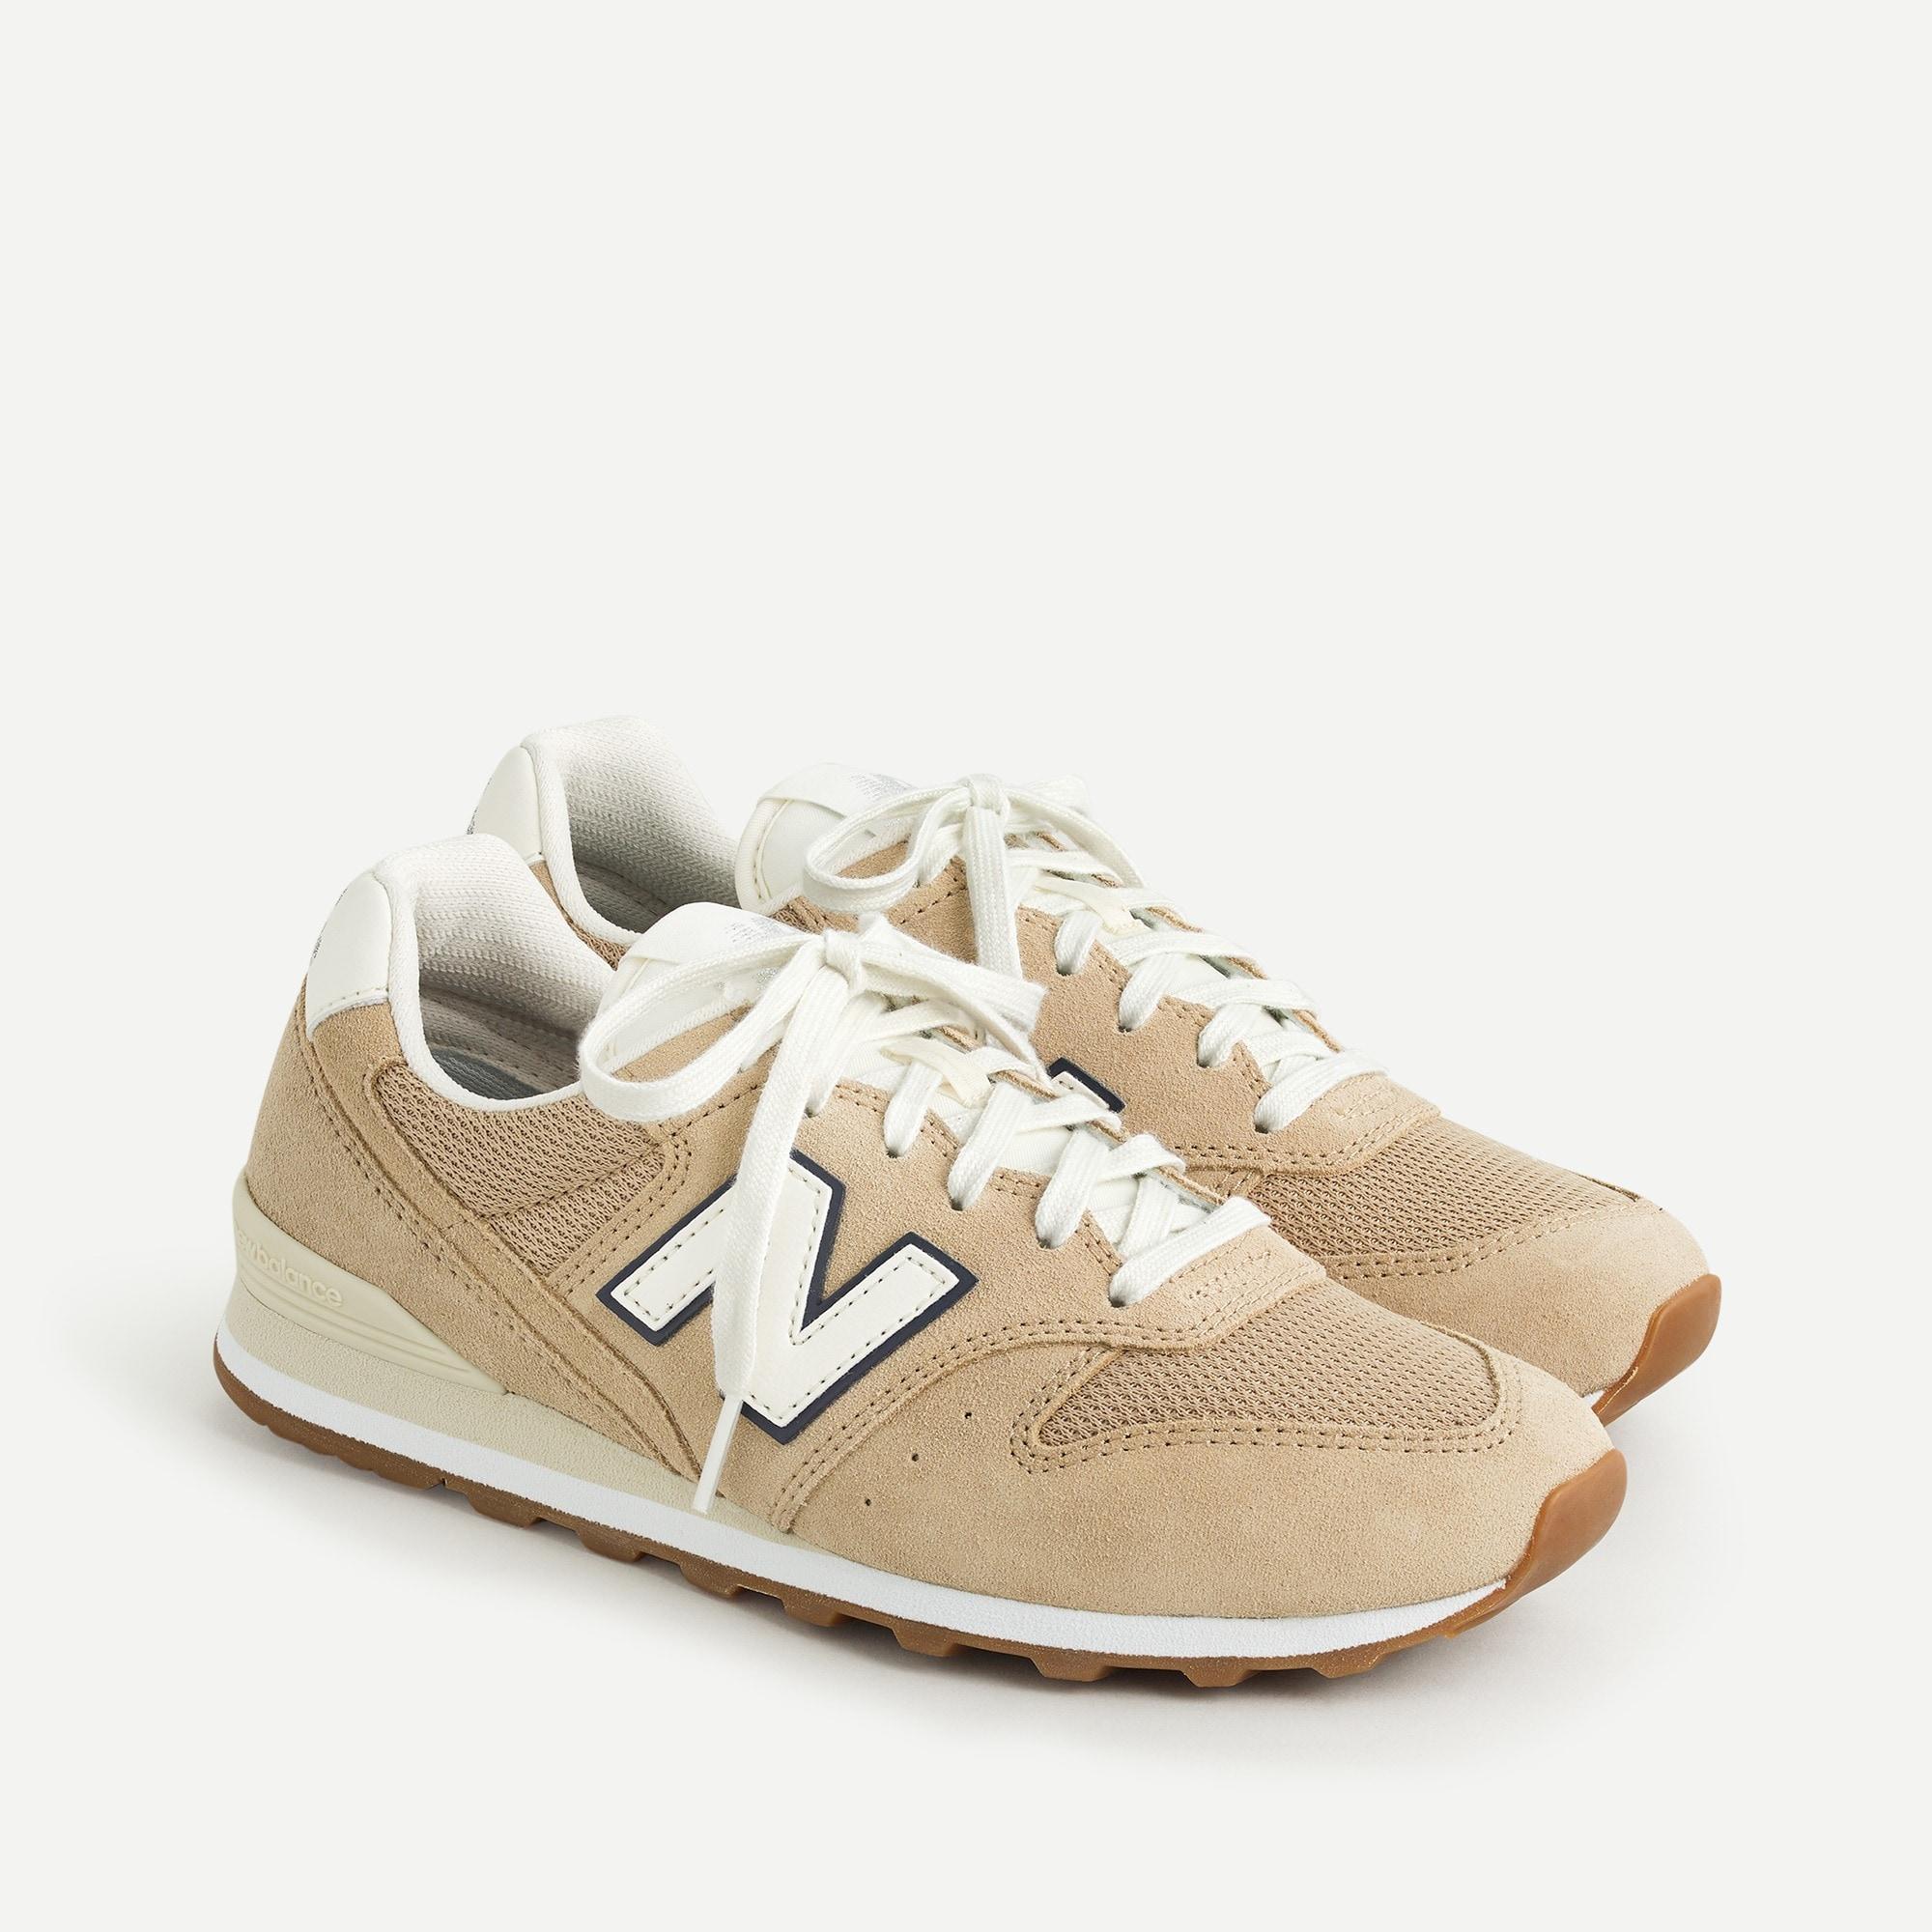 New Balance ® X J.crew 996 Sneakers In Suede in Sand/Ivory ...